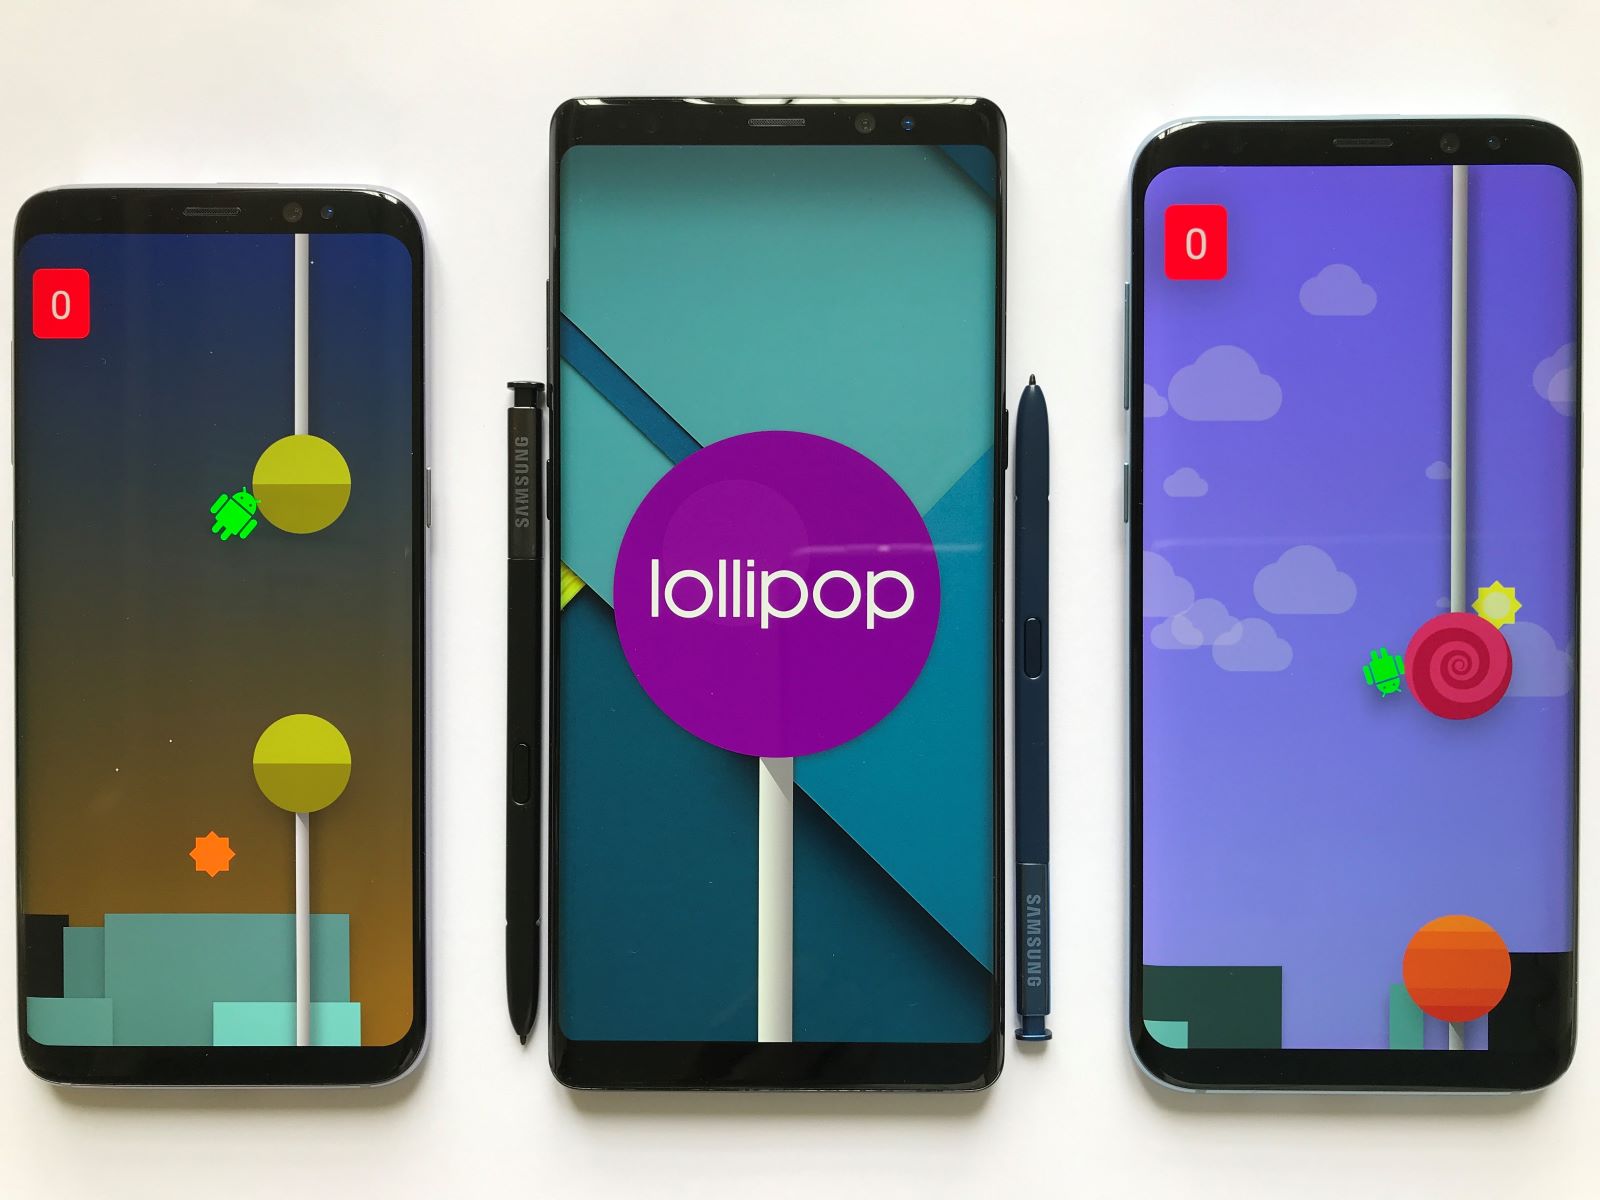 android-lollipop